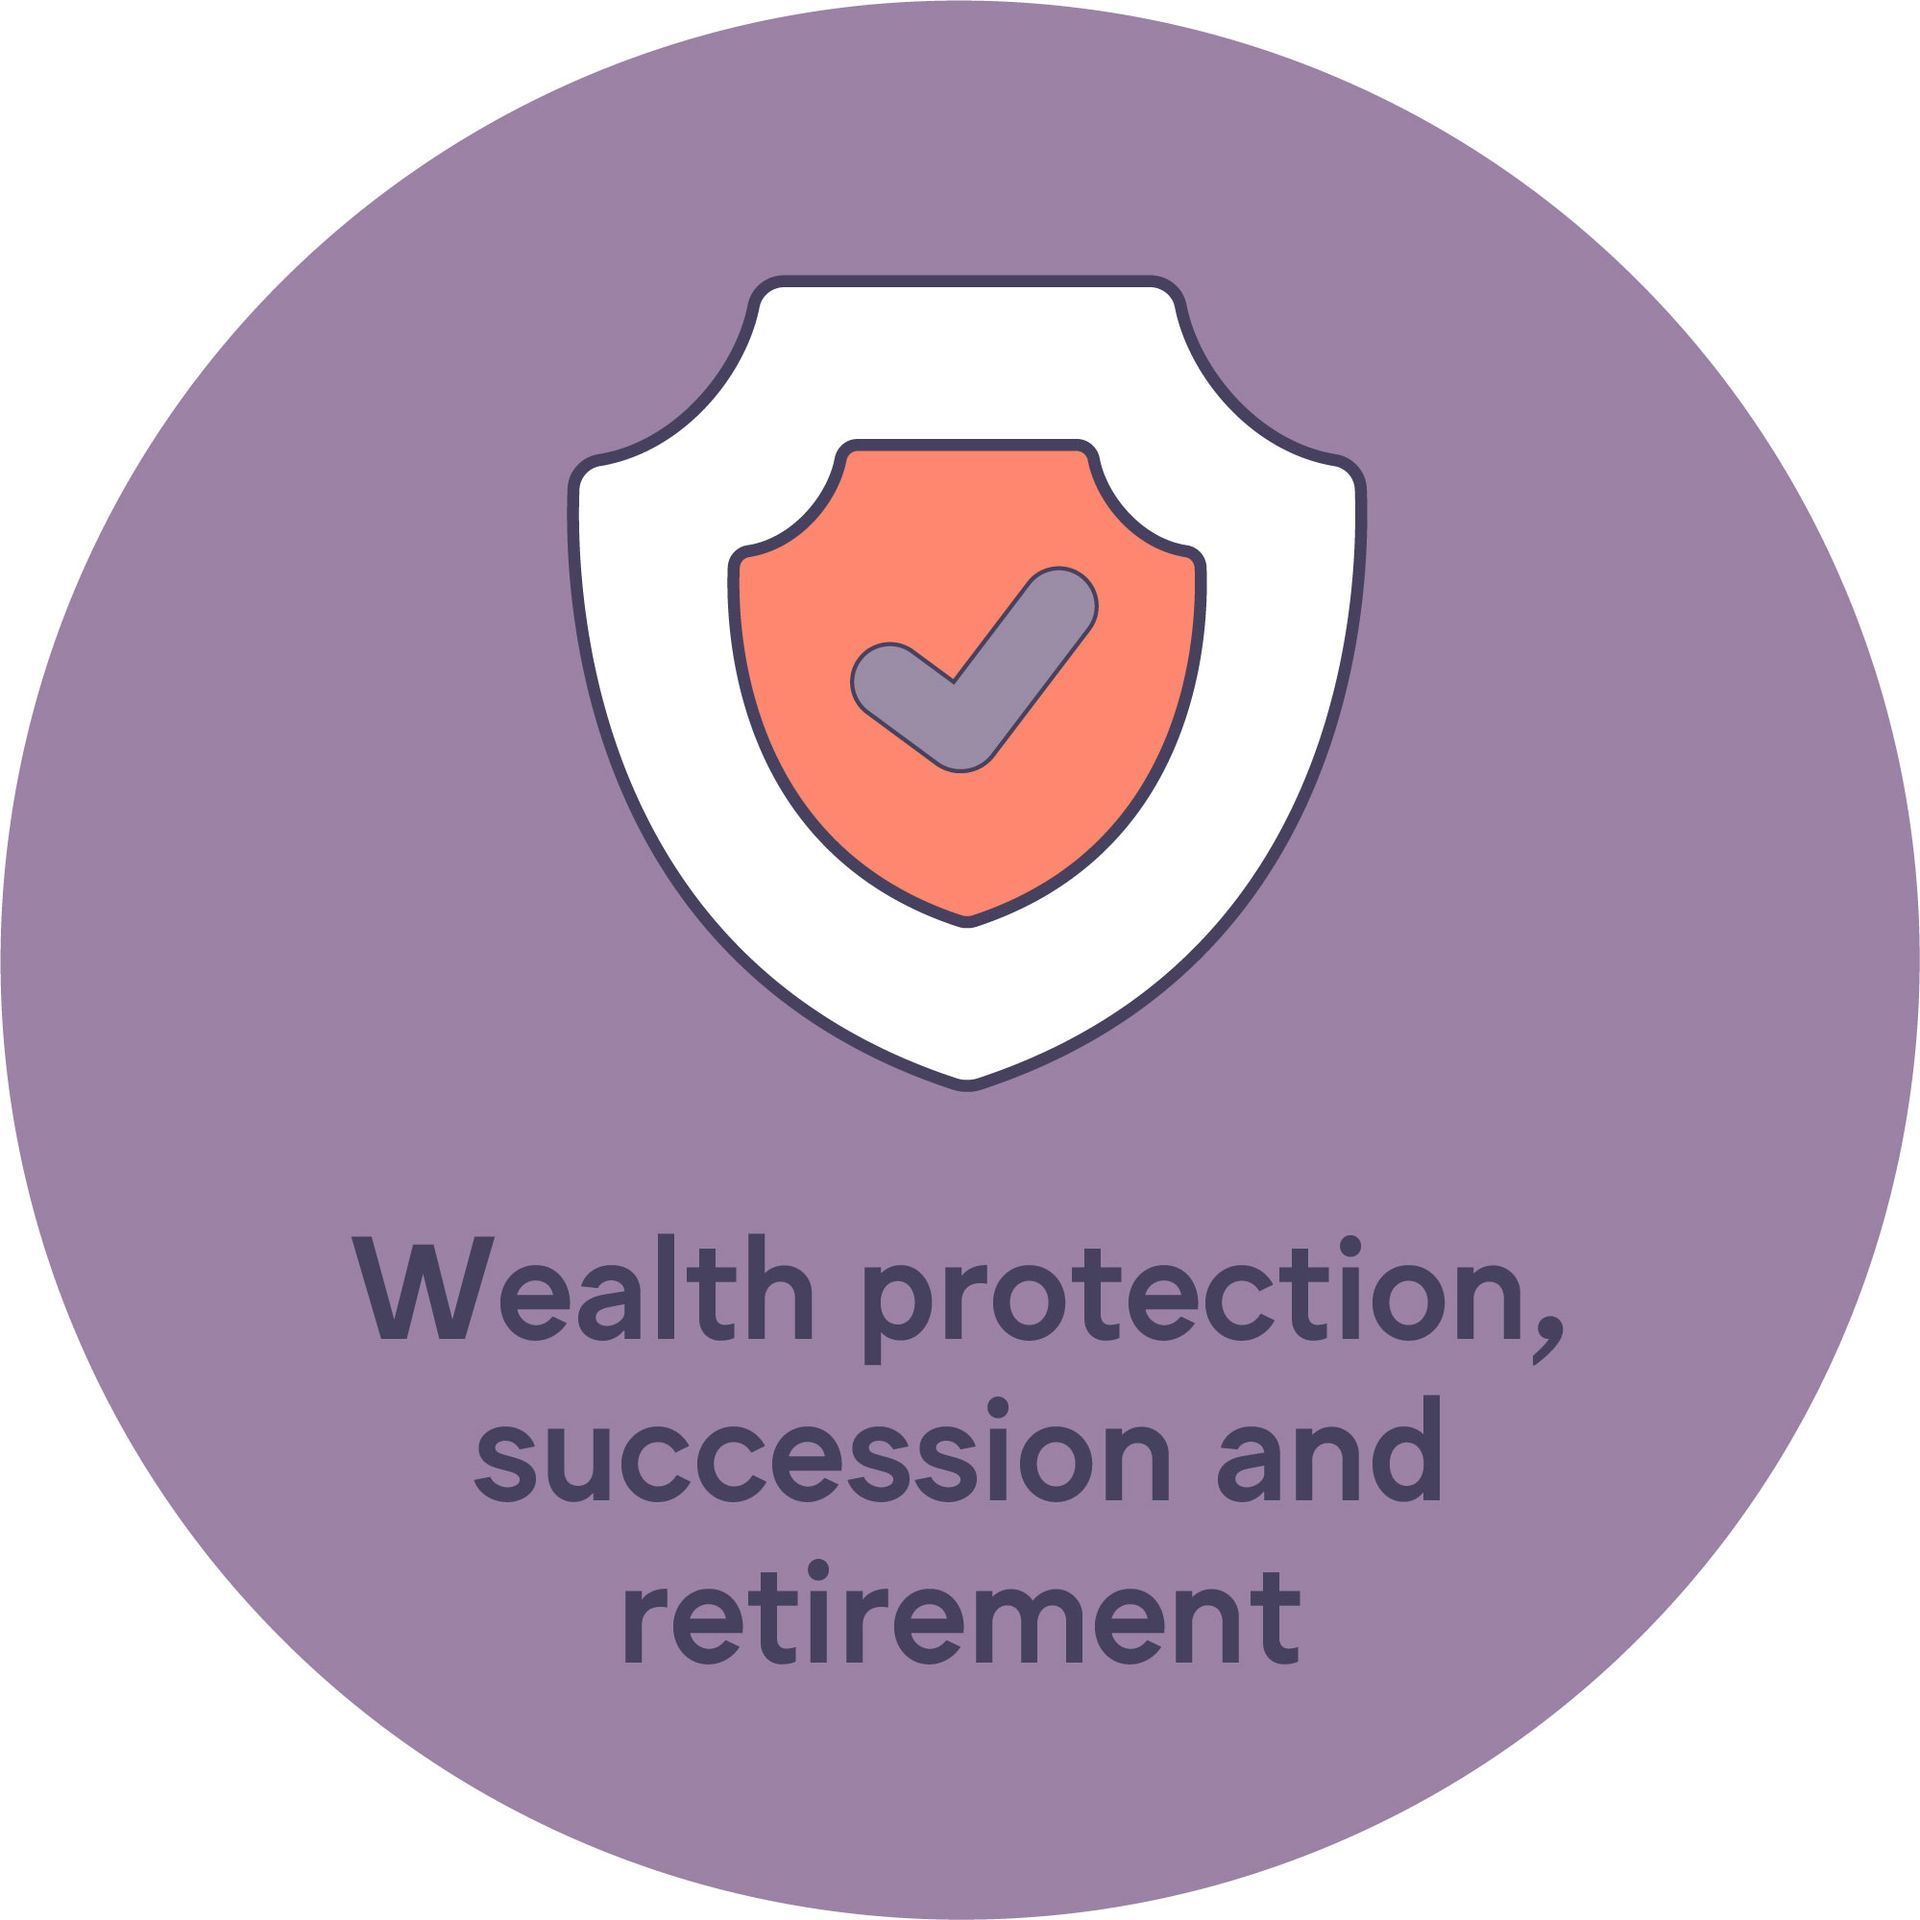 Wealth protection, succession and retirement icon supporting the Brentnalls for Life process.